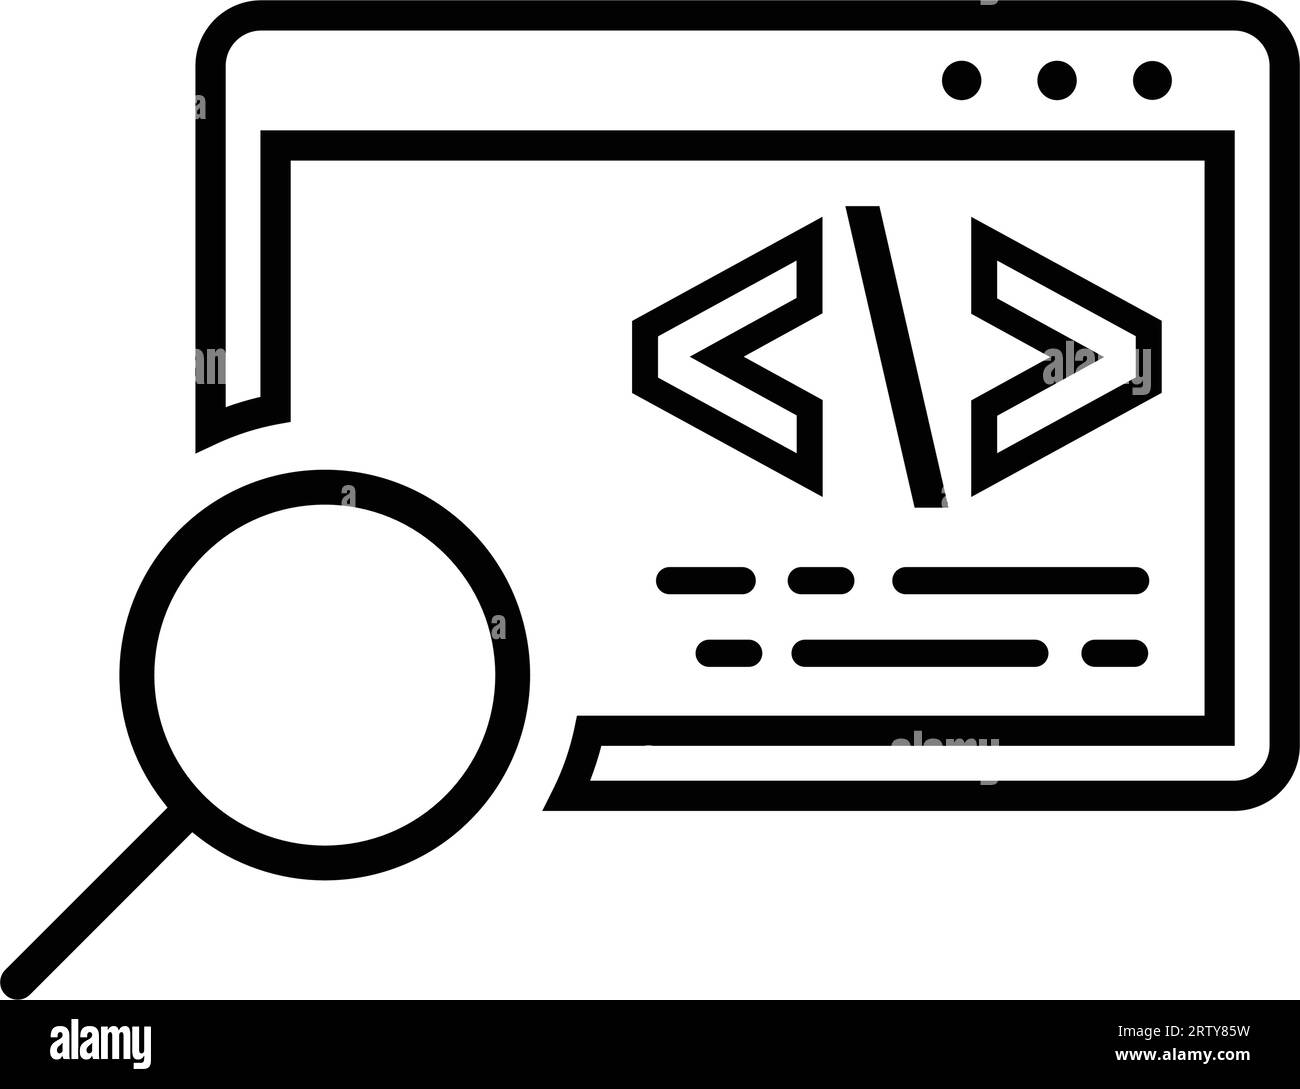 Coder finding icon. Use for designing and developing websites, commercial purposes, print media, web or any type of design task. Stock Vector